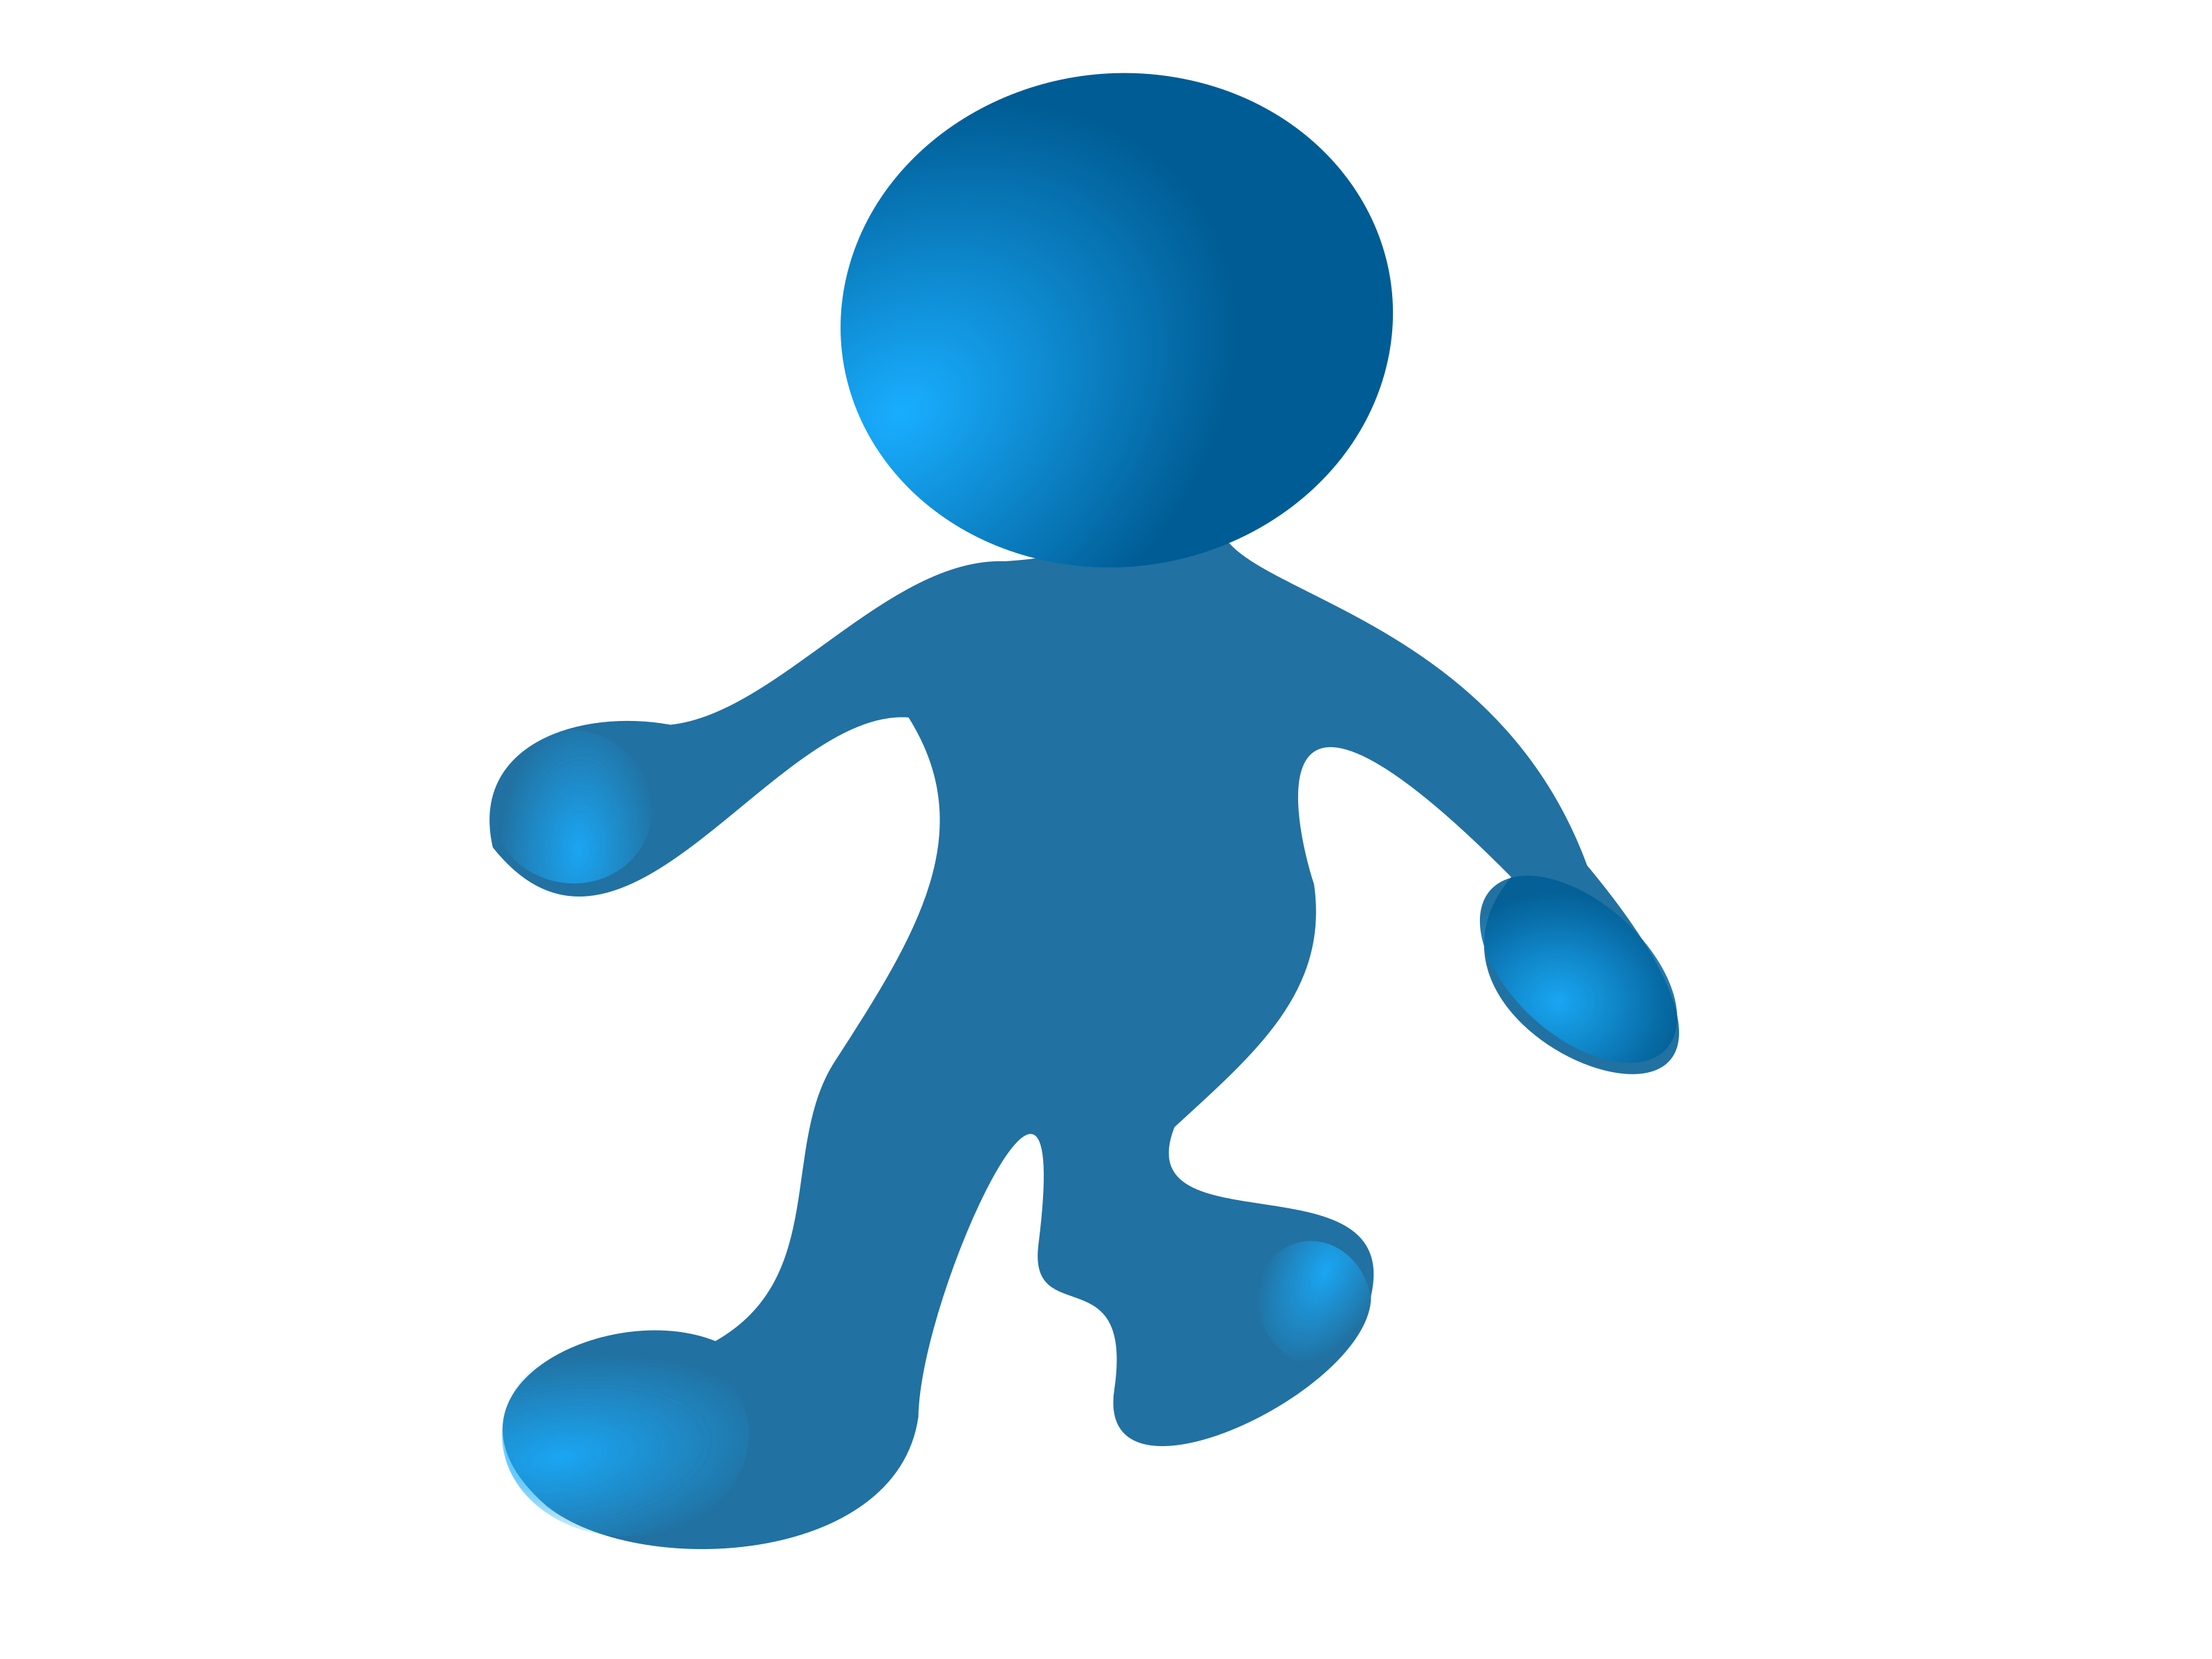 Human clipart animated, Human animated Transparent FREE for download.